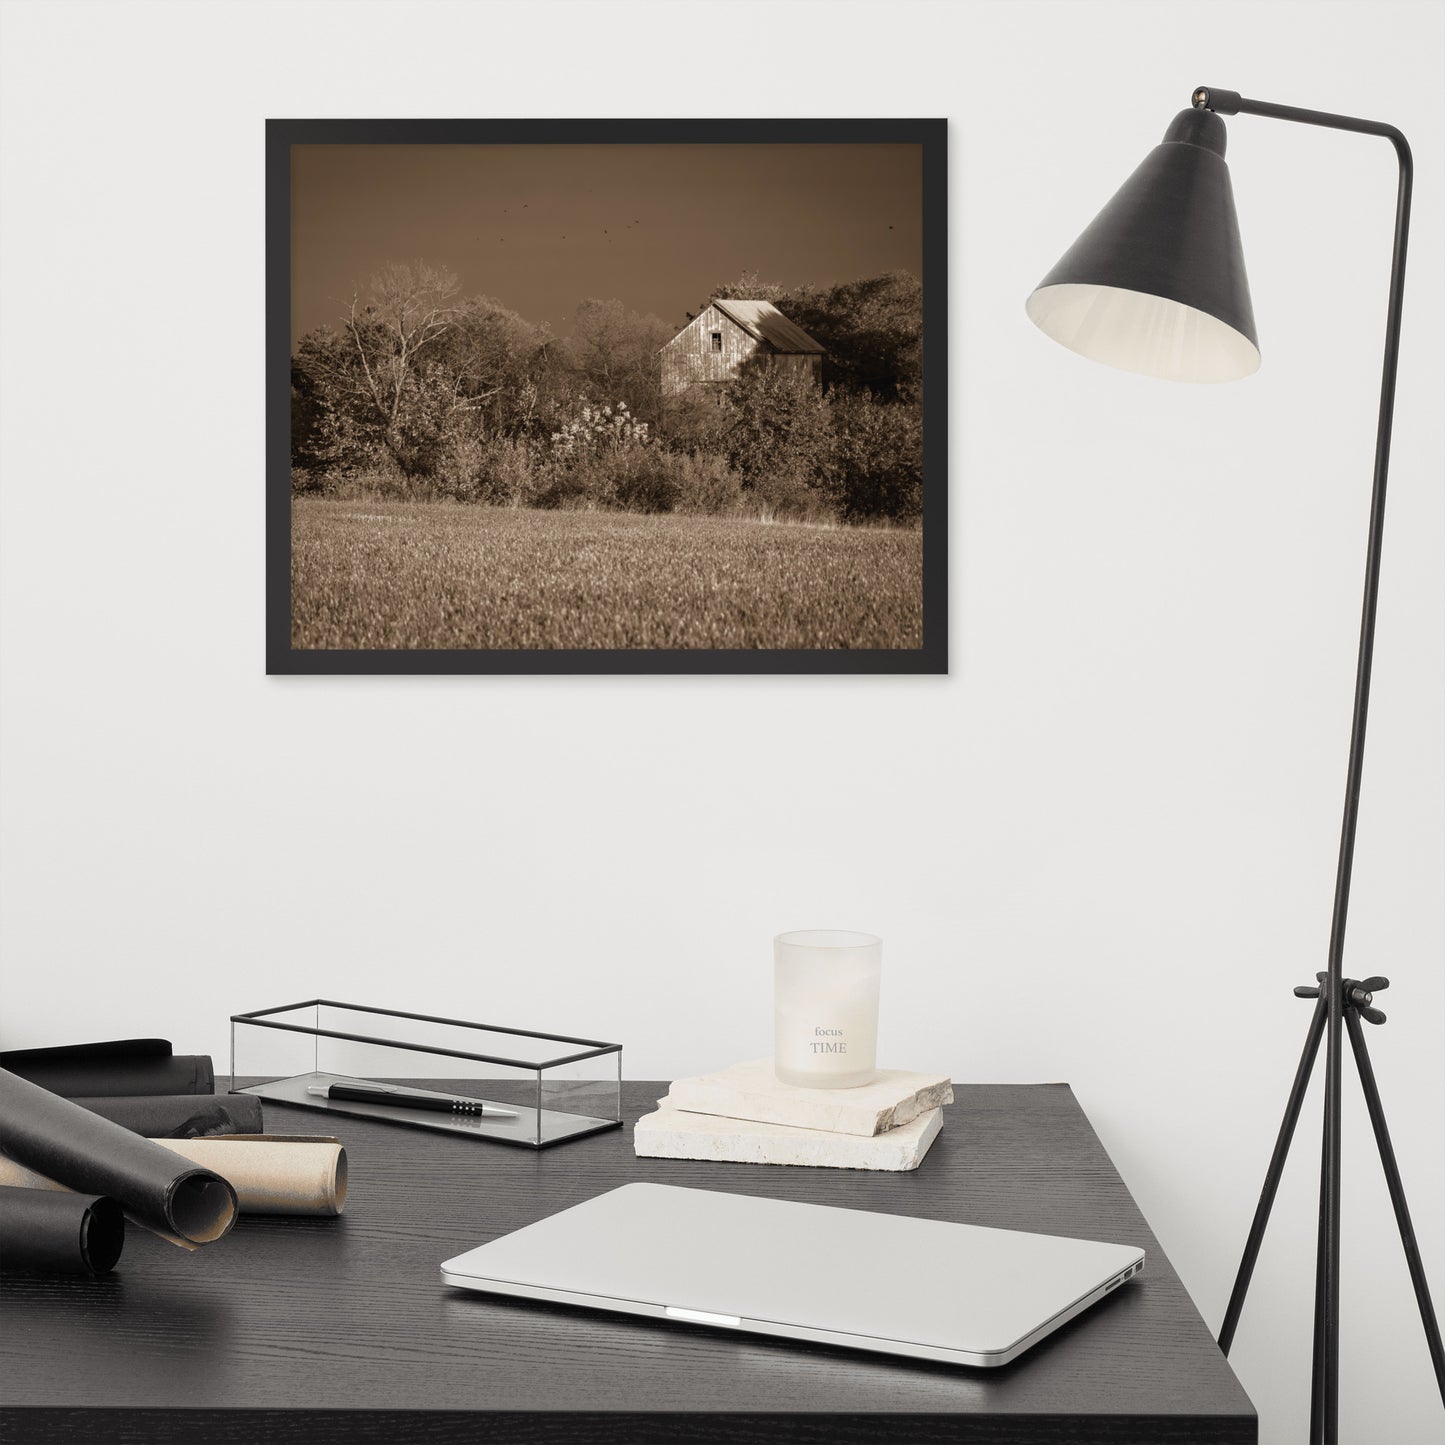 Rustic Artwork For Walls: Framed Country Wall Art: Abandoned Barn In The Trees Sepia - Rural / Country Style / Landscape / Nature Framed Photo Paper Prints - Artwork - Wall Decor